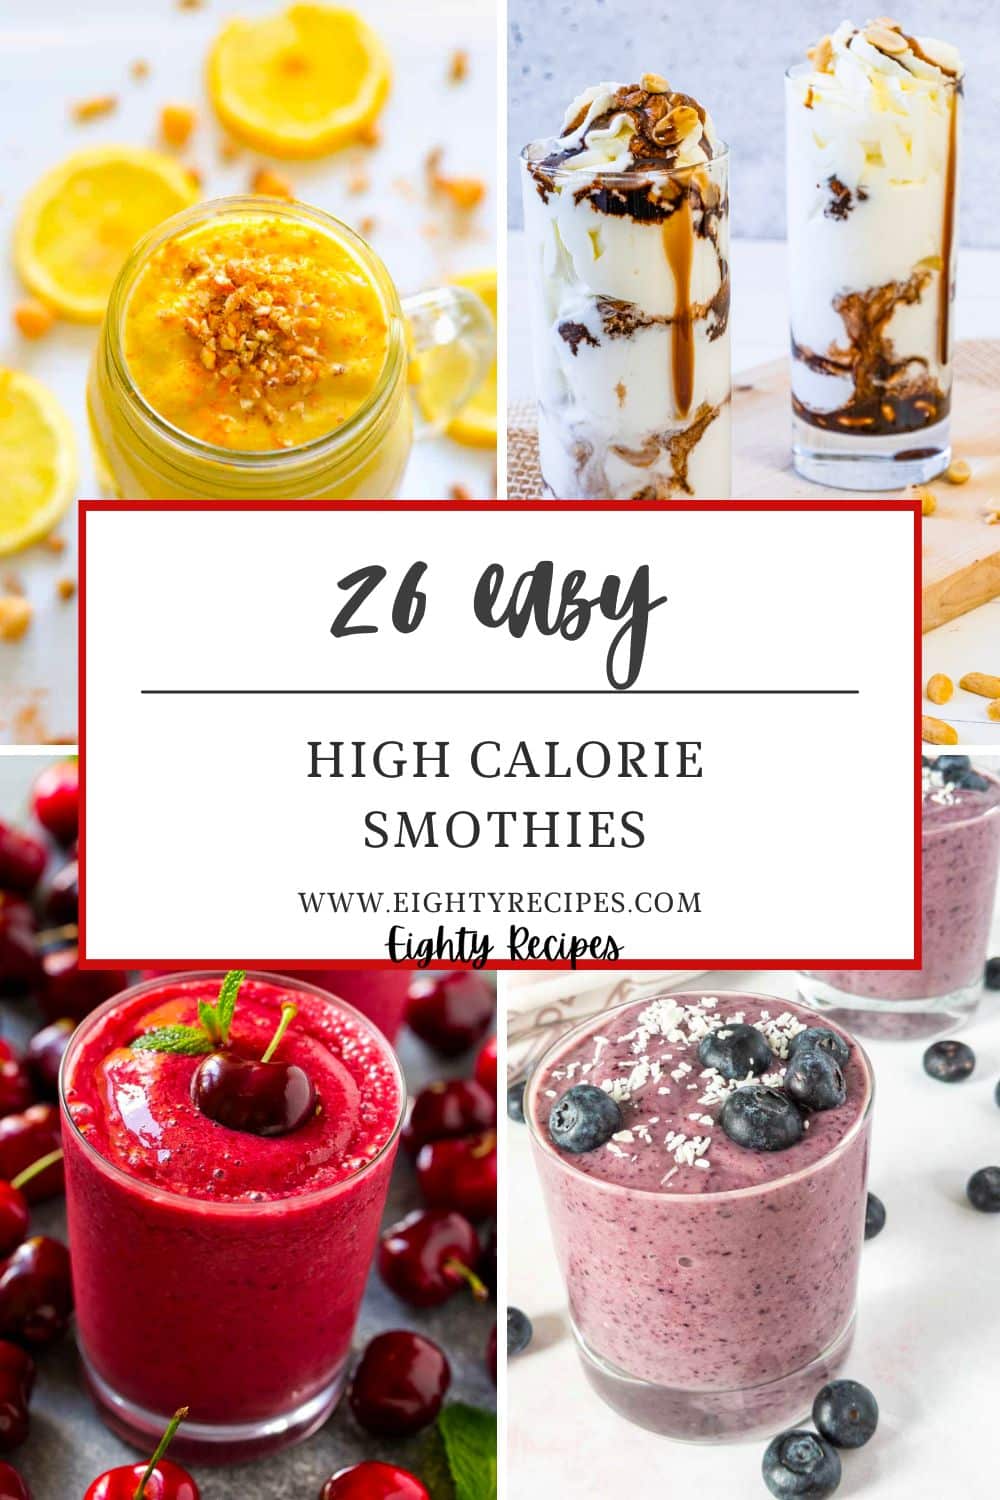 Get A Daily Calorie Boost With These 26 High-Calorie Smoothies